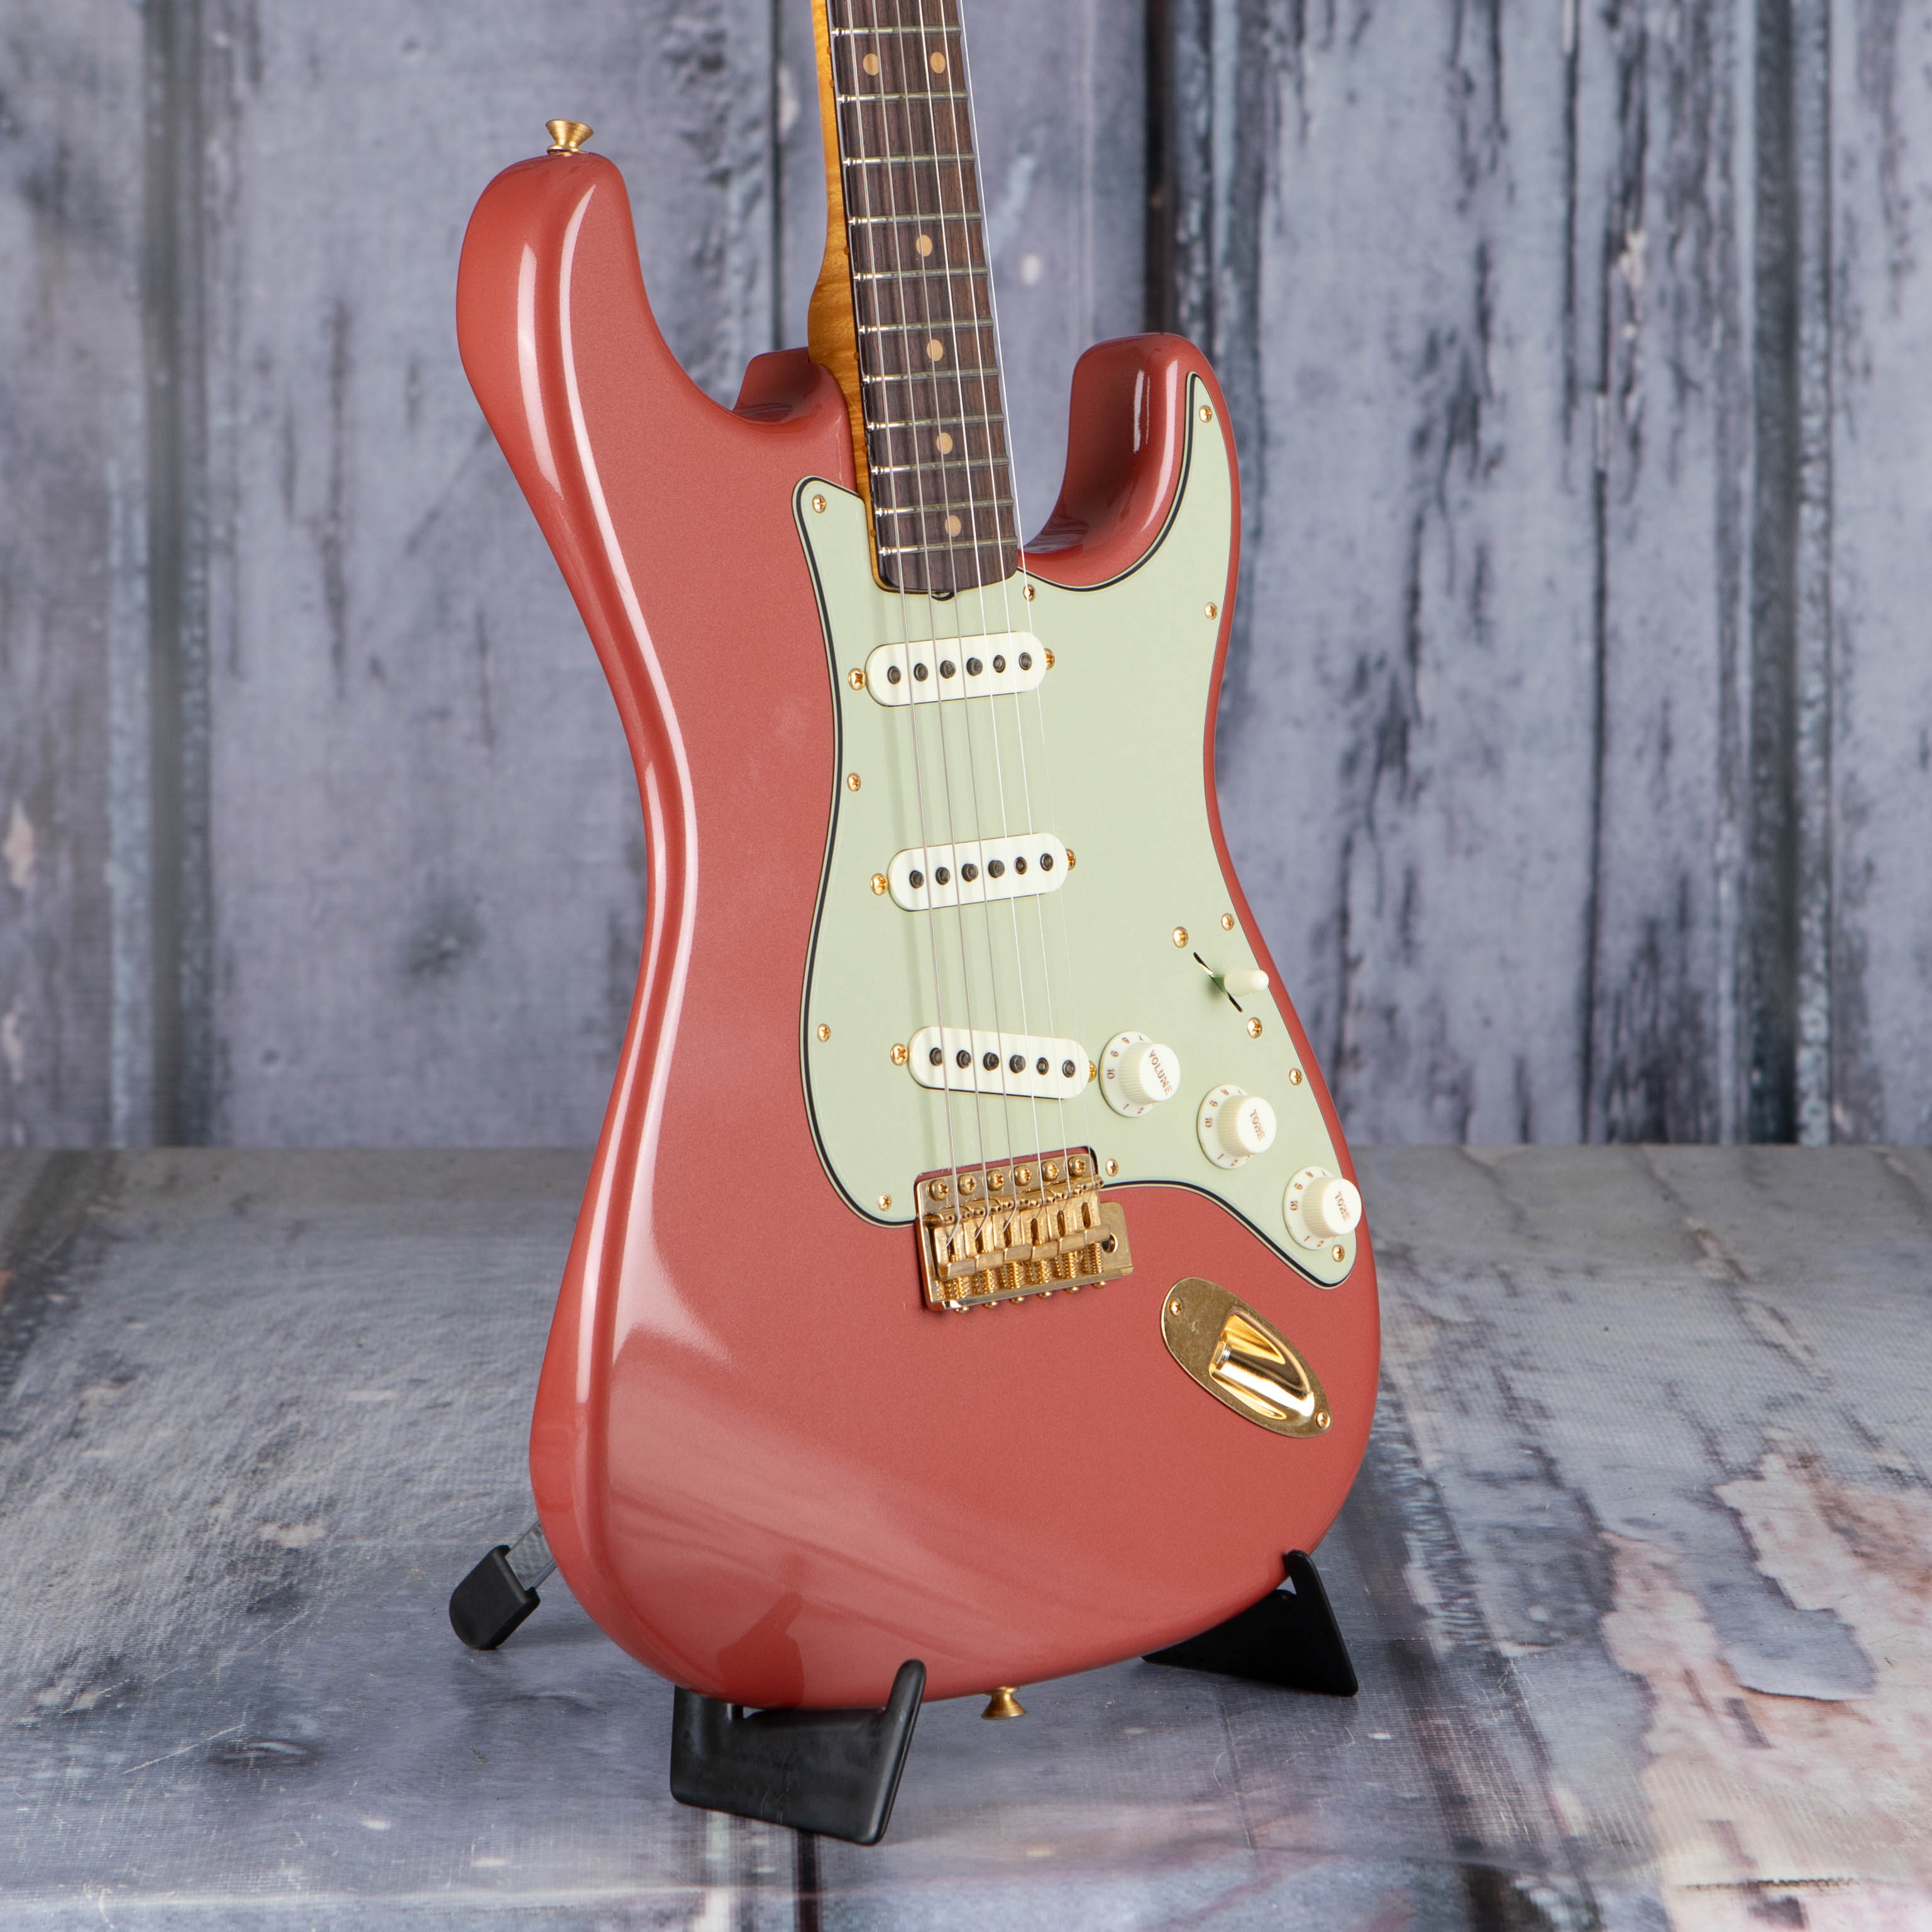 Fender Custom Shop Johnny A. Signature Stratocaster Time Capsule Electric Guitar, Sunset Glow Metallic with Gold Hardware, angle